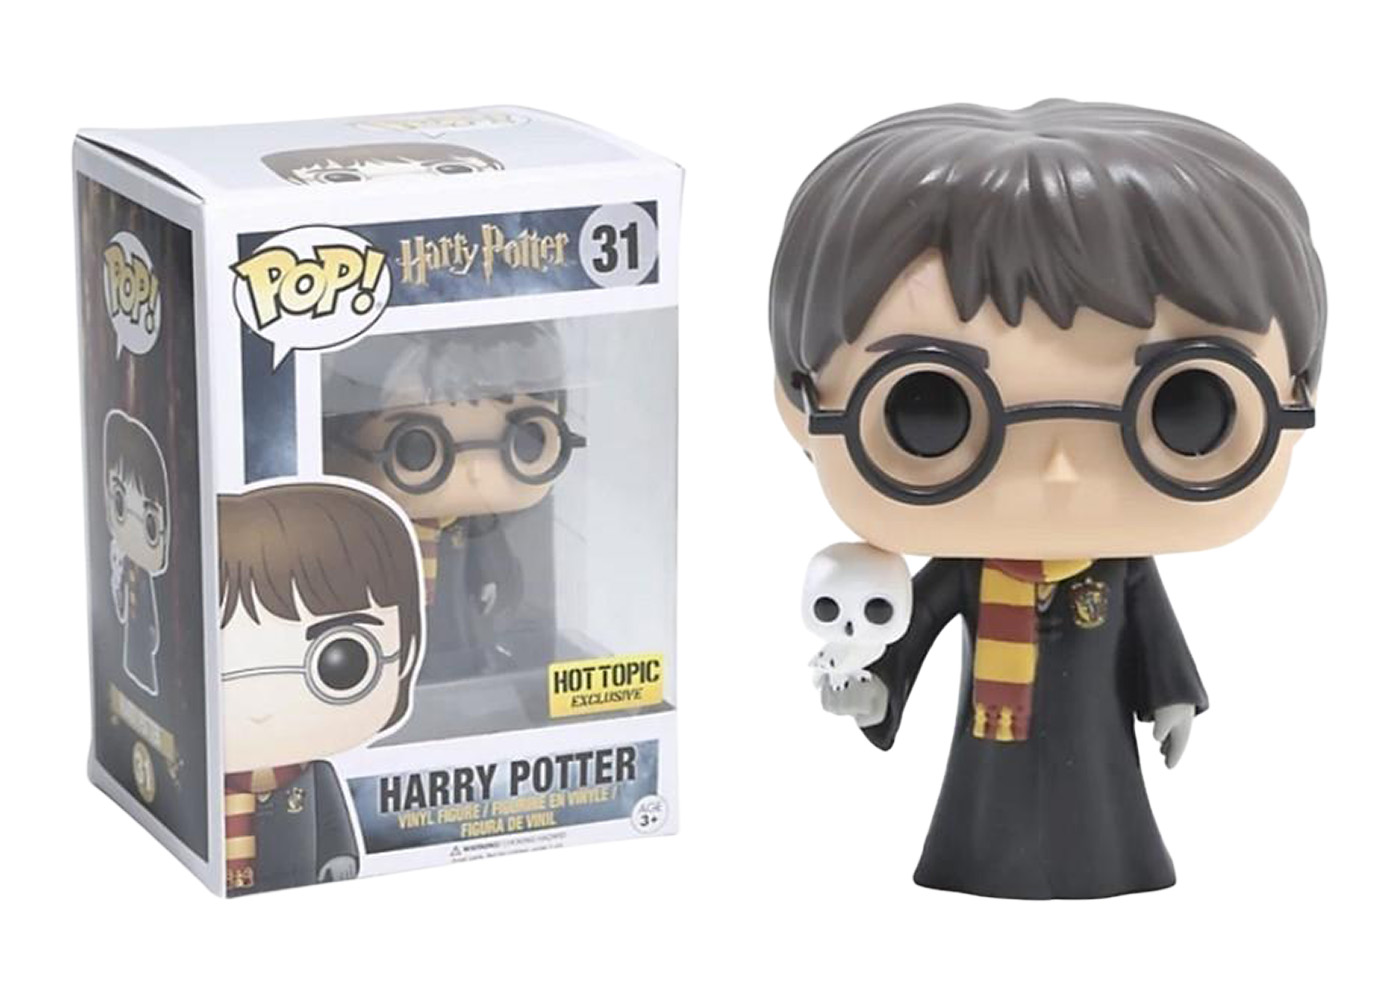 Funko Pop! Harry Potter Harry Potter with Hedwig Hot Topic